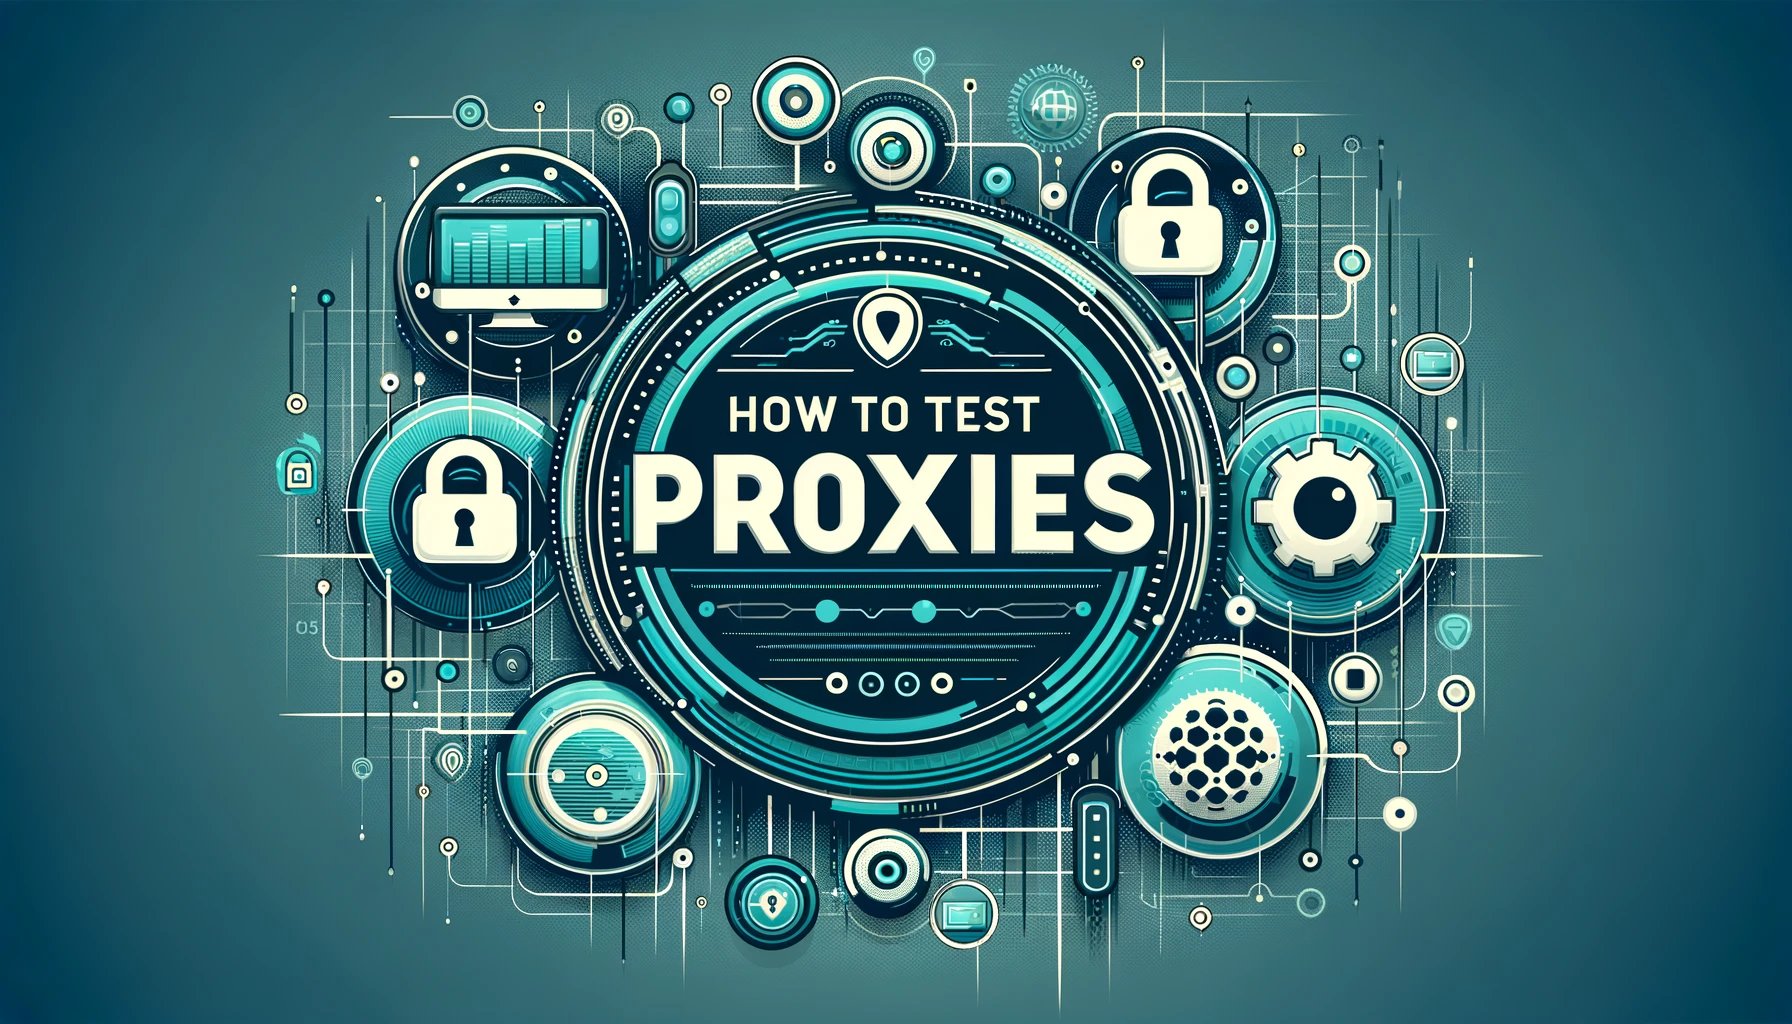 How to test proxies